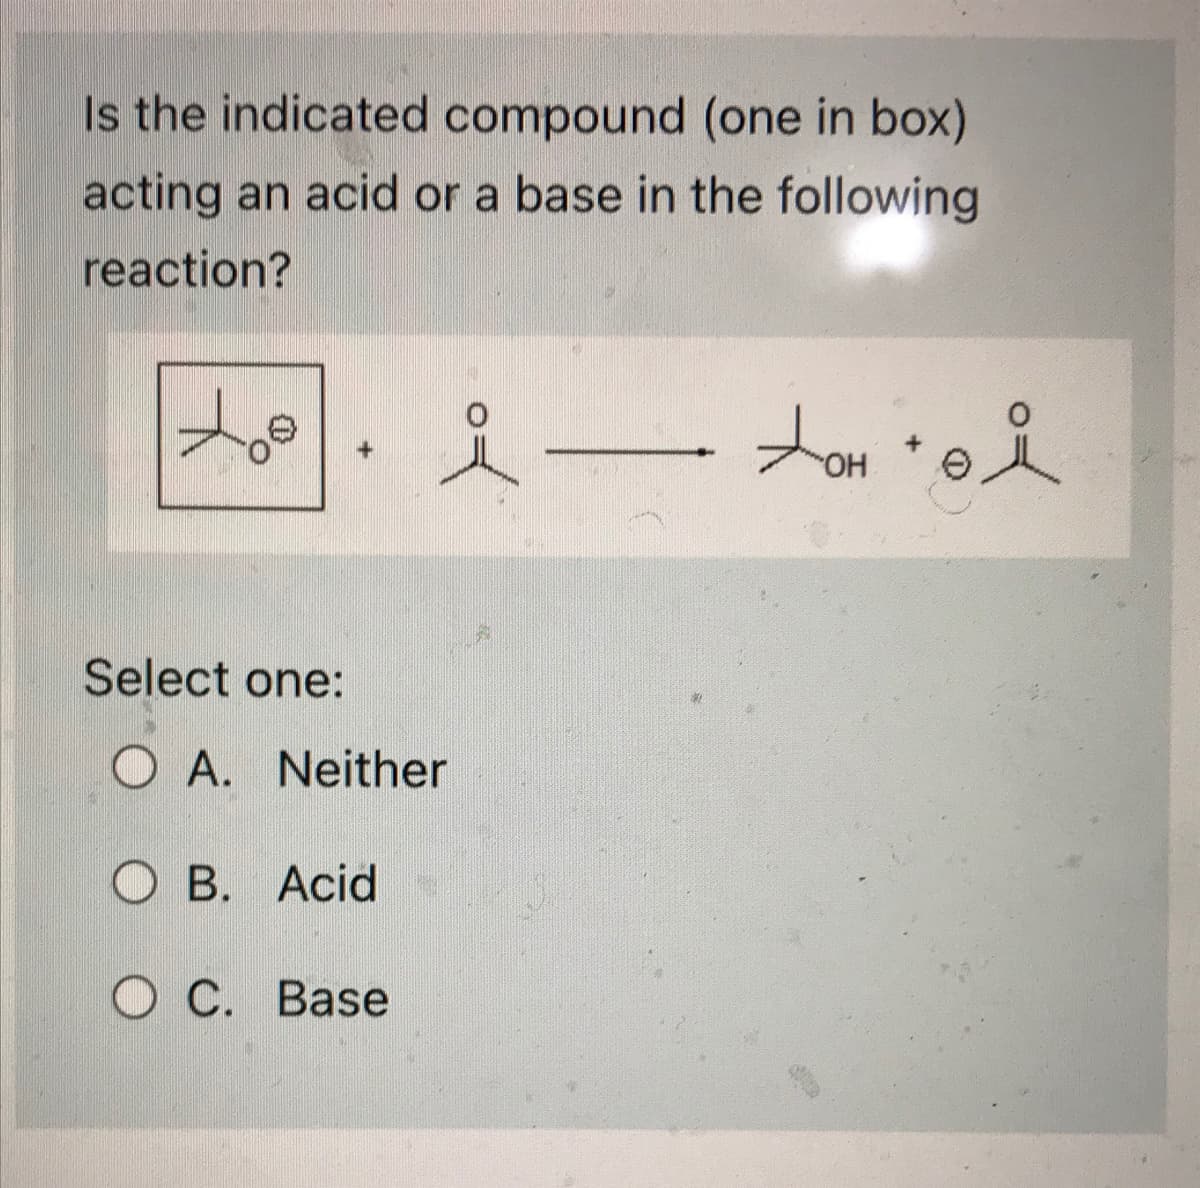 Is the indicated compound (one in box)
acting an acid or a base in the following
reaction?
to
Select one:
OA. Neither
OB. Acid
i omi
OH
OC. Base